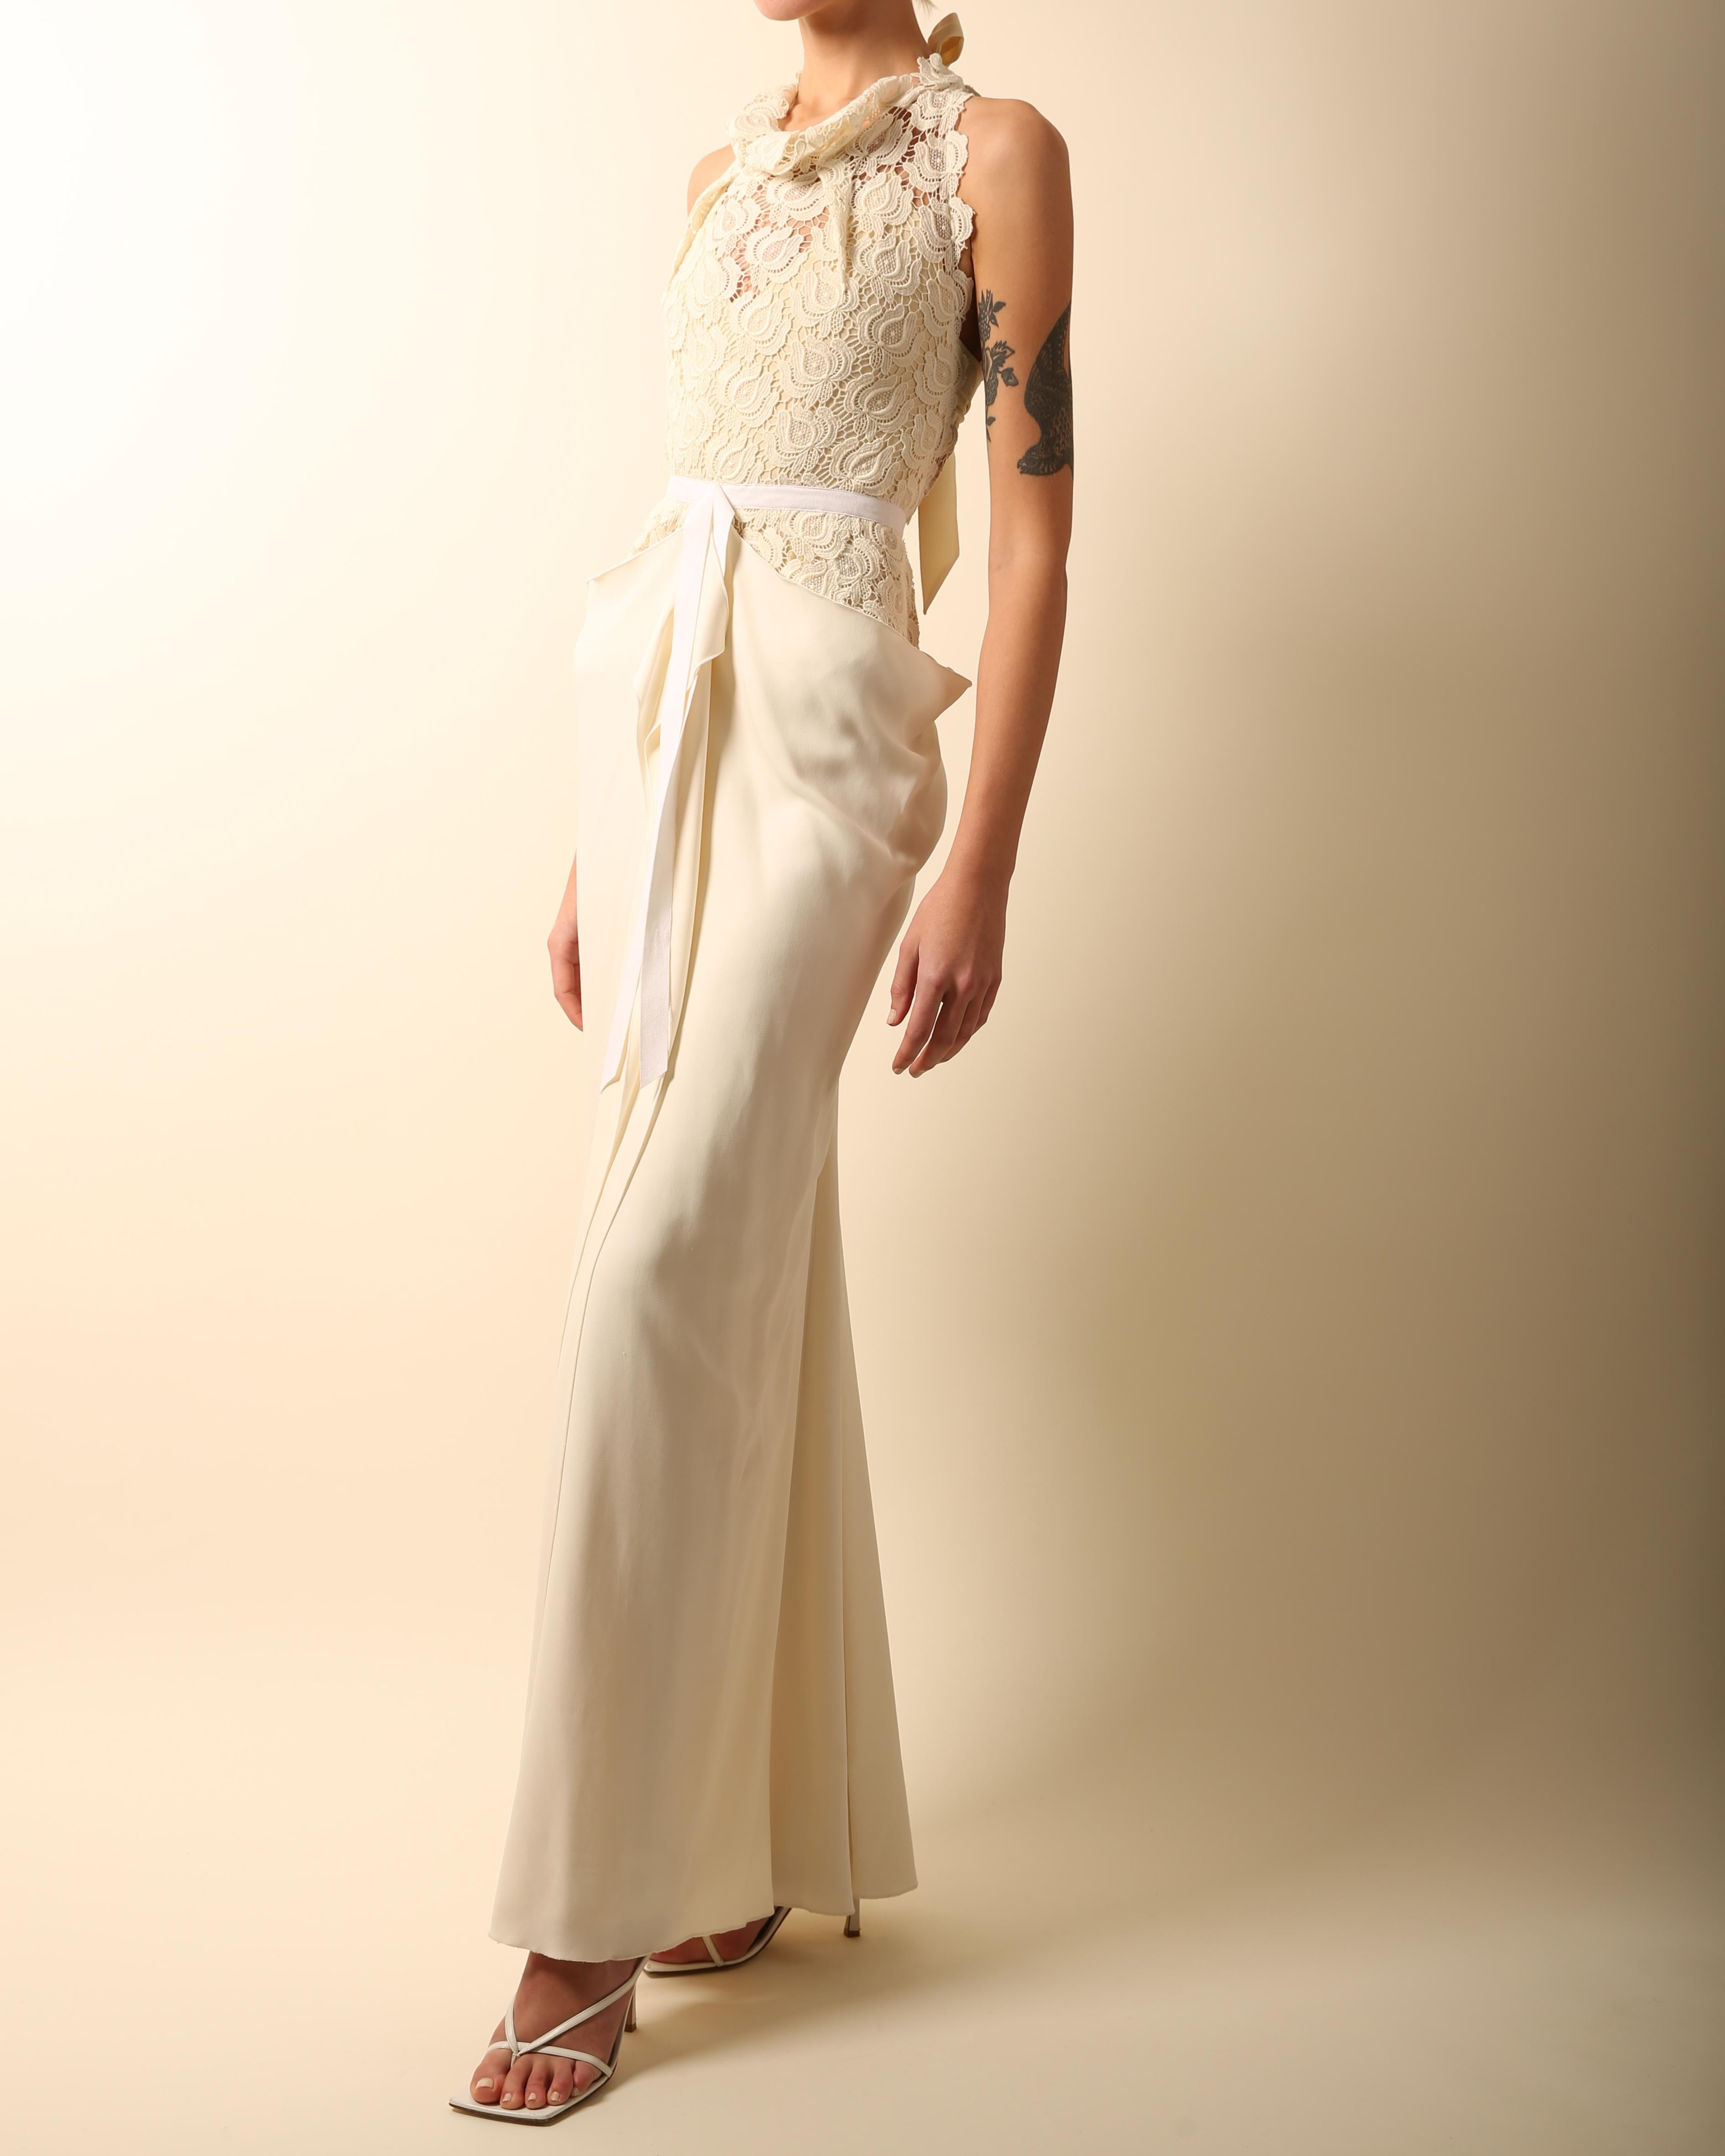 Women's Roland Mouret ivory cream lace halter ribbon tie cut out backless wedding dress